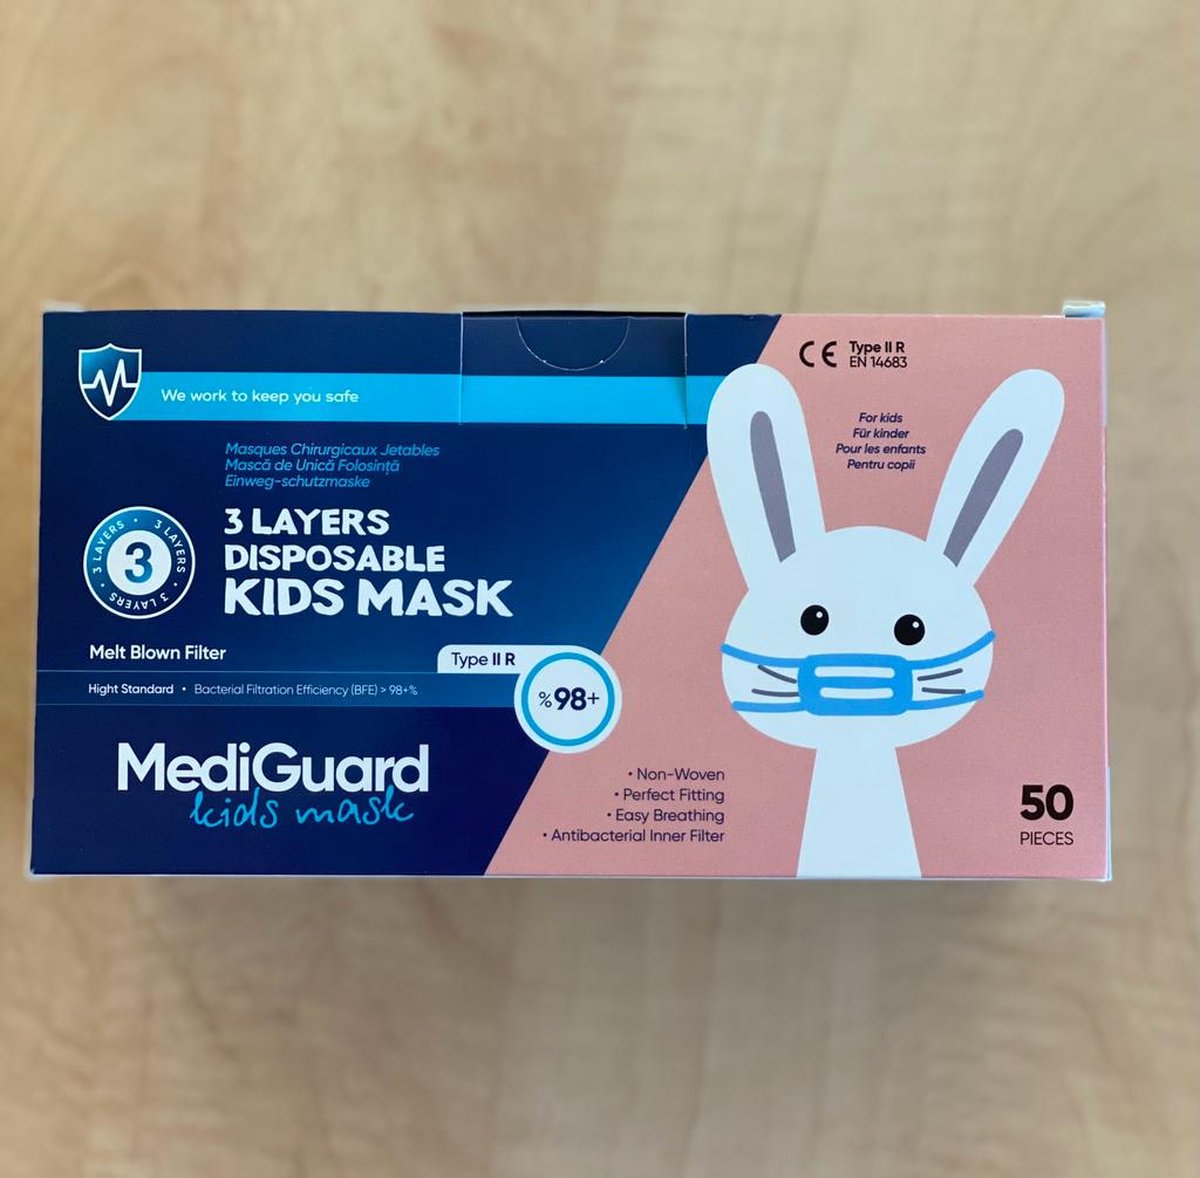 Kids Mask 3 Layers Disposable Type II R Melt Blown Filter Hight Standard Bacterial Filtration Efficiency BFE 98+% 2x50pieces=100